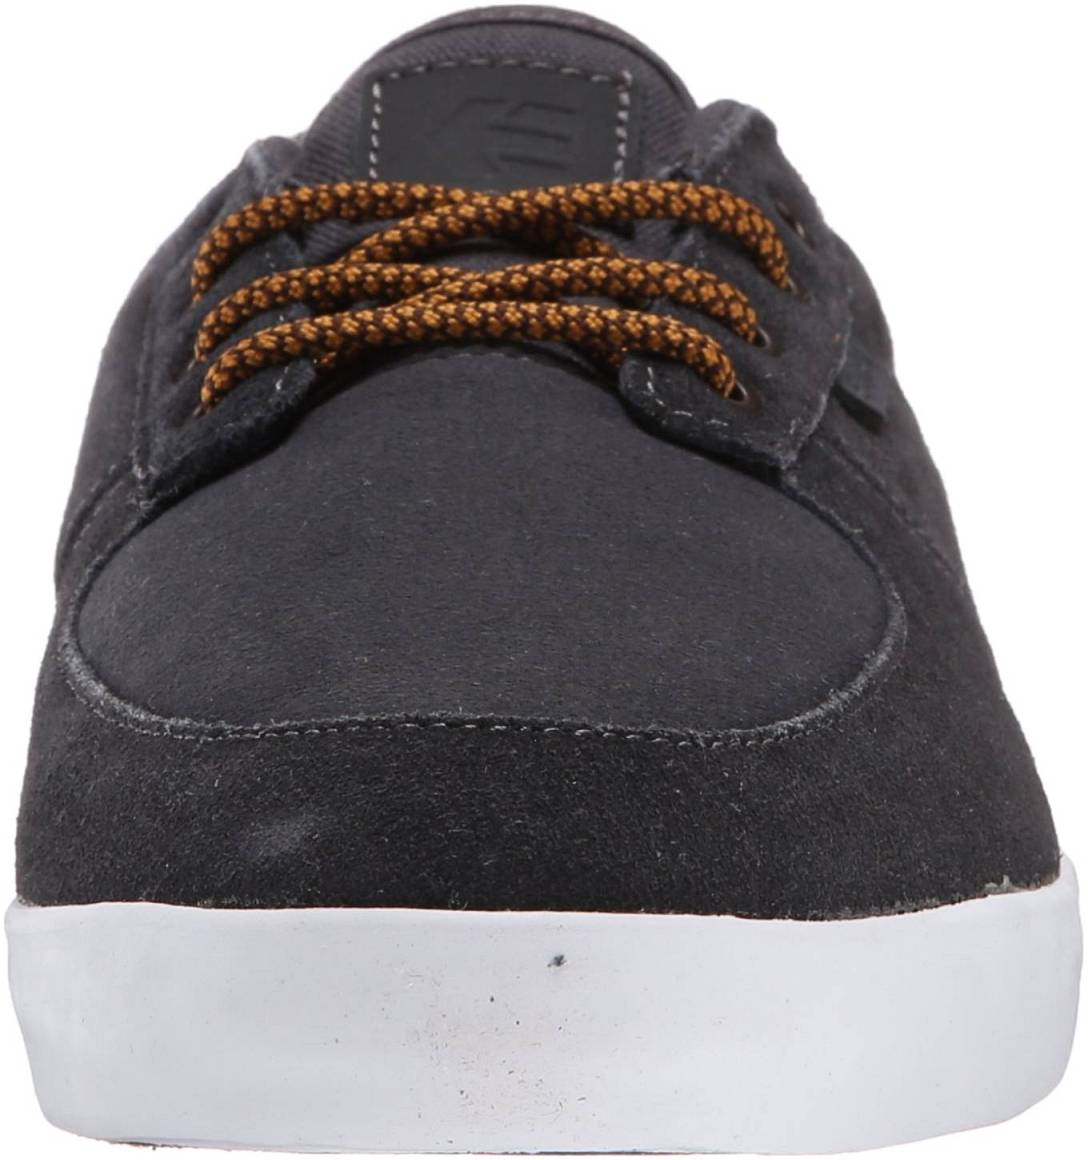 Etnies Hitch – Shoes Reviews & Reasons To Buy